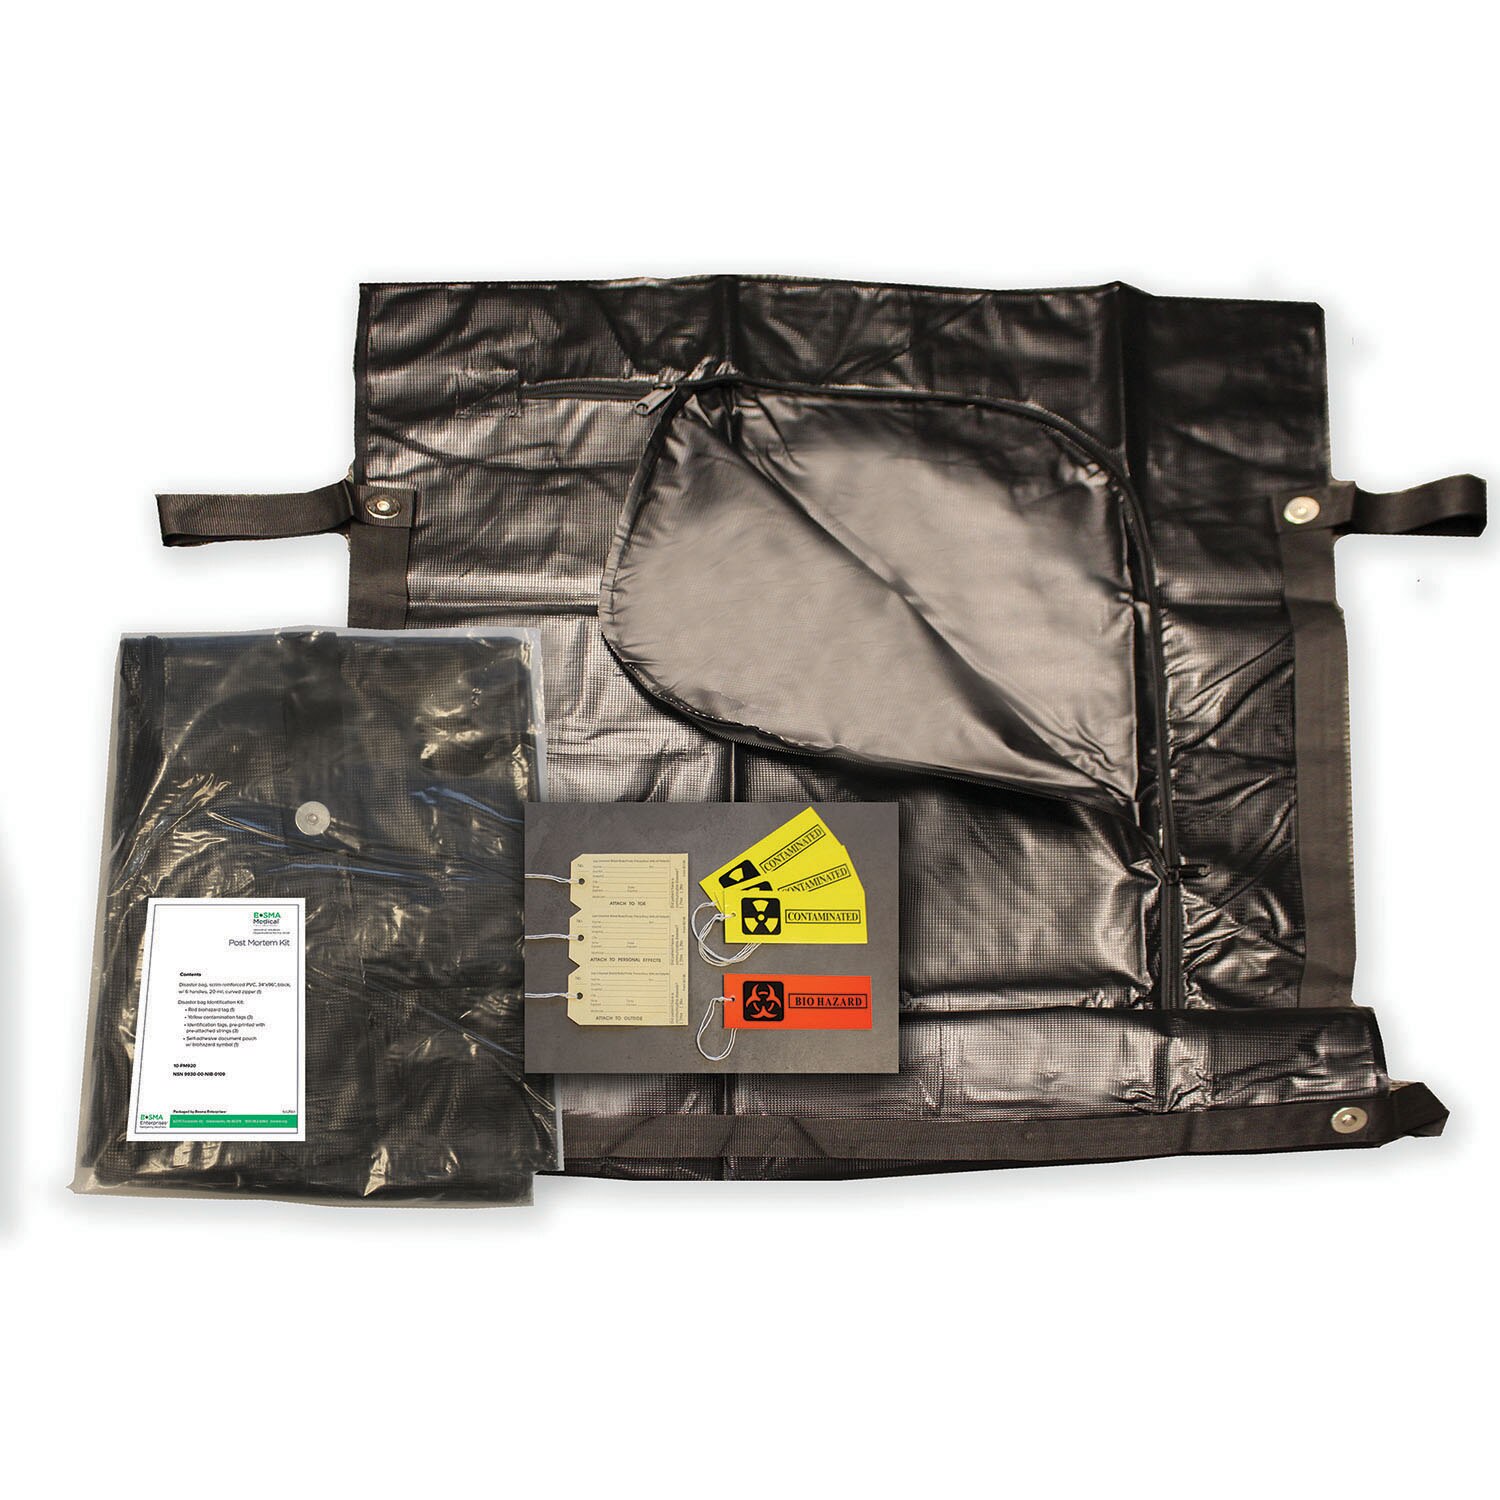 Kit, Disaster Bag with ID Tags, 34" x 96"